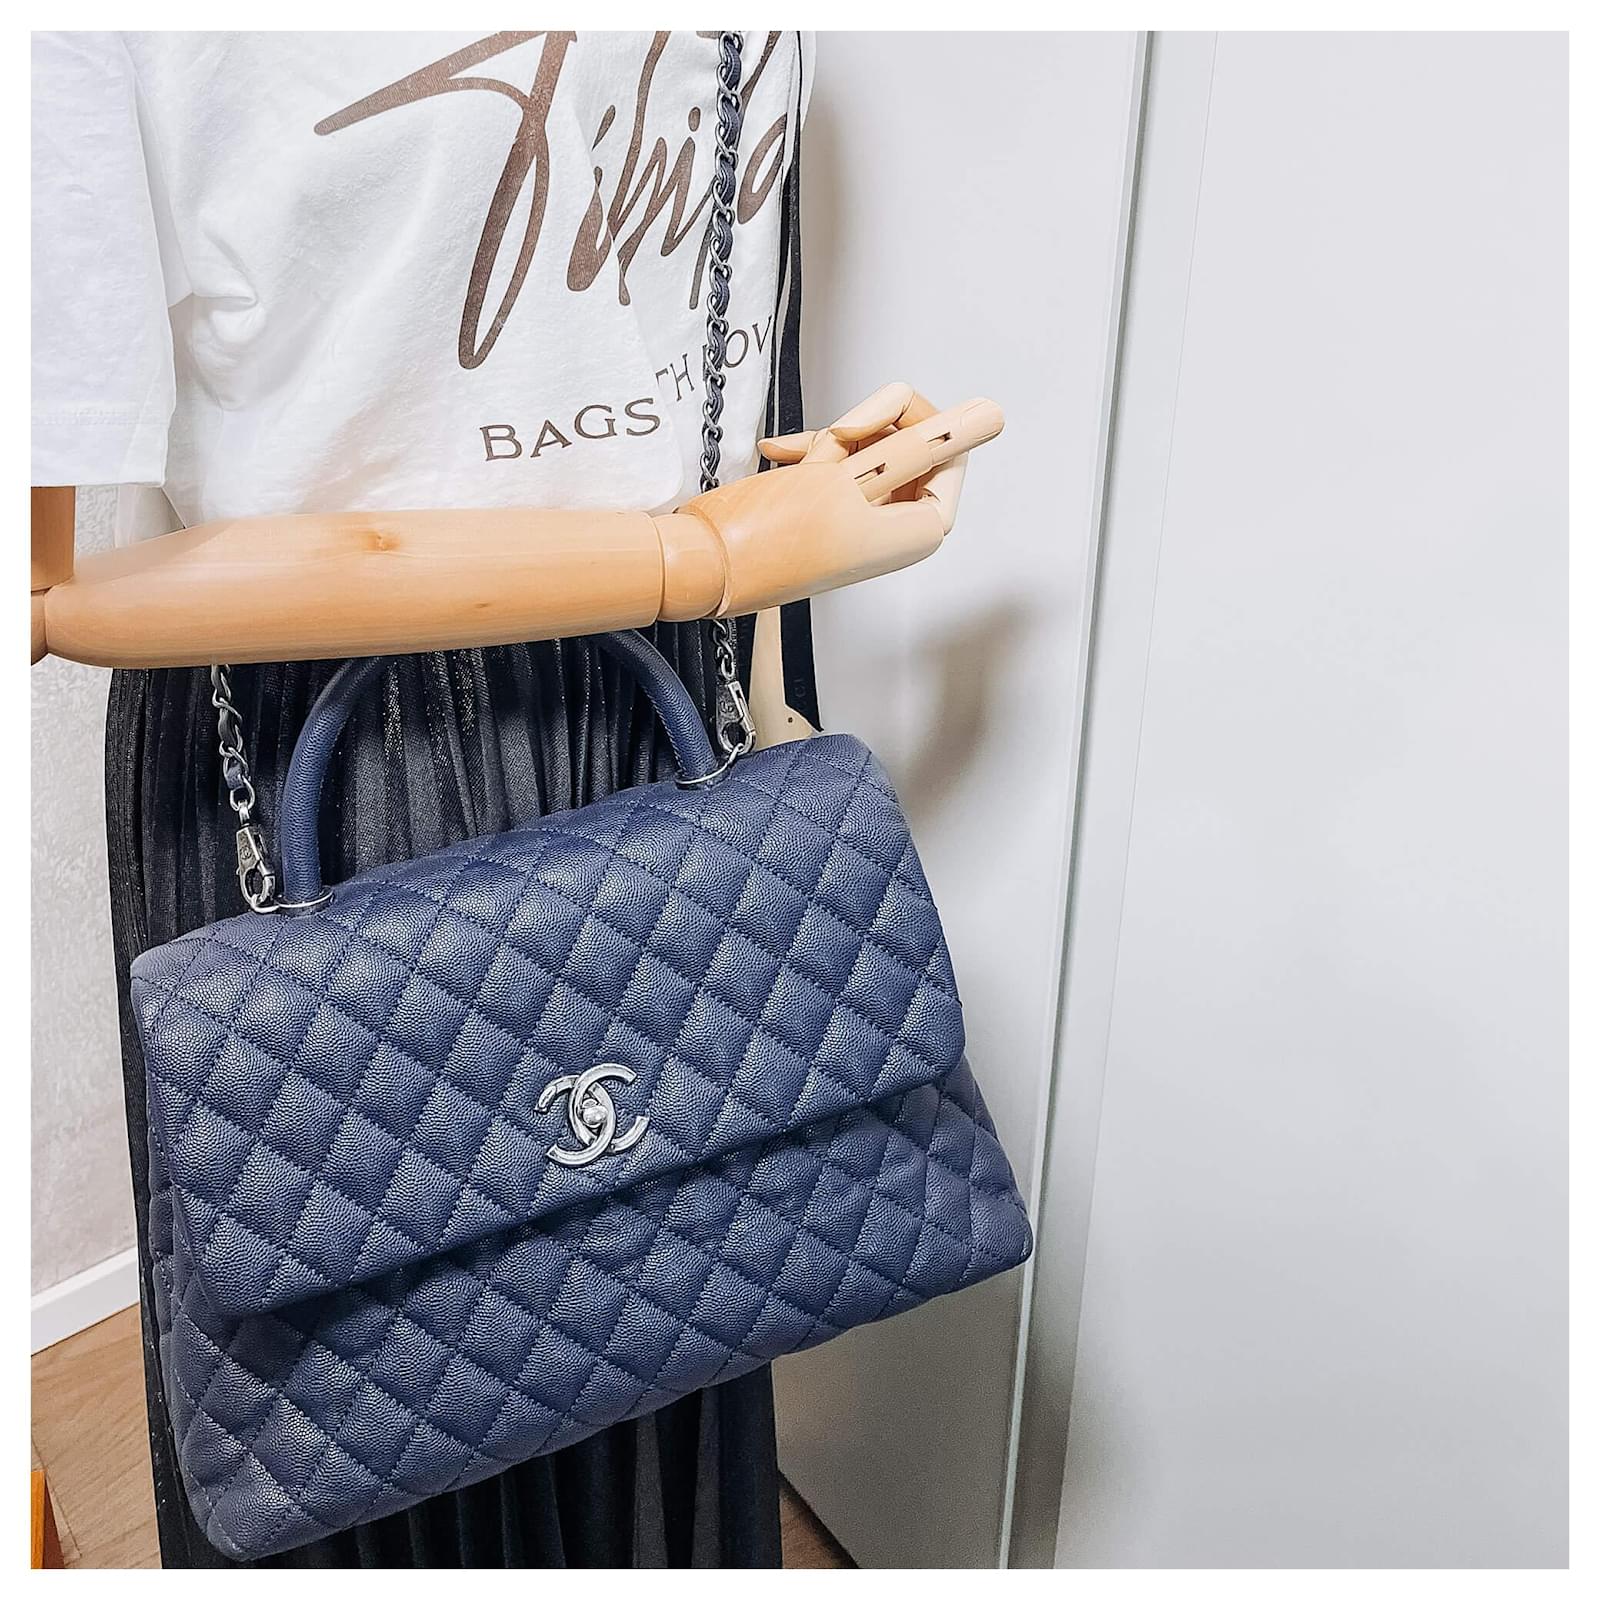 Chanel Blue Caviar Leather and Lizard Medium Coco Top Handle Bag Chanel |  The Luxury Closet